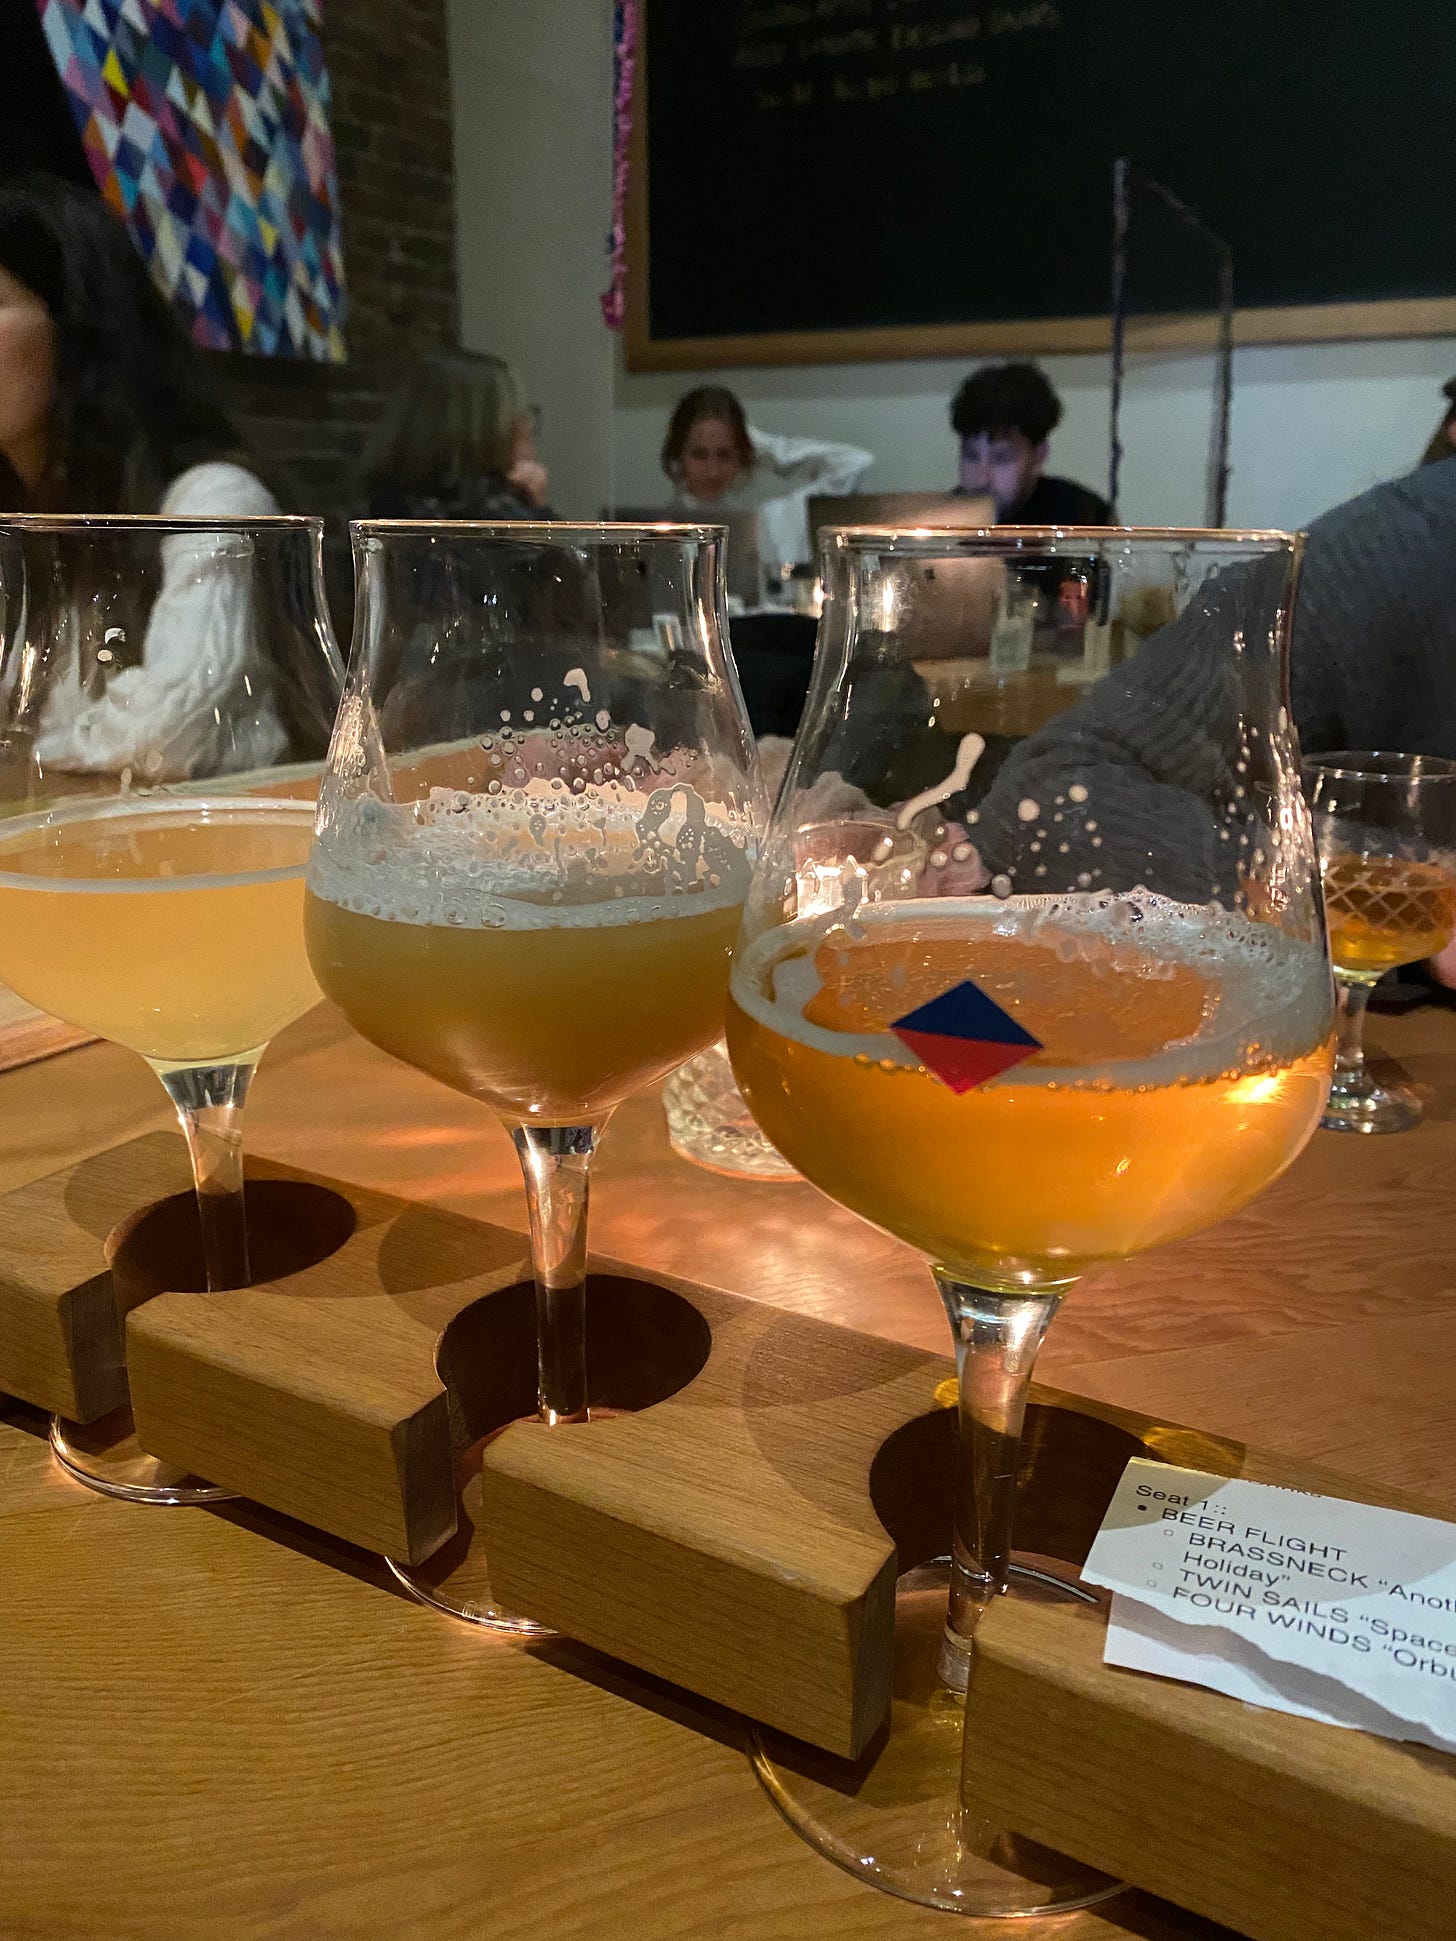 A flight of three beers in tulip glasses. A red and black diamond logo is visible on the front of the nearest glass.